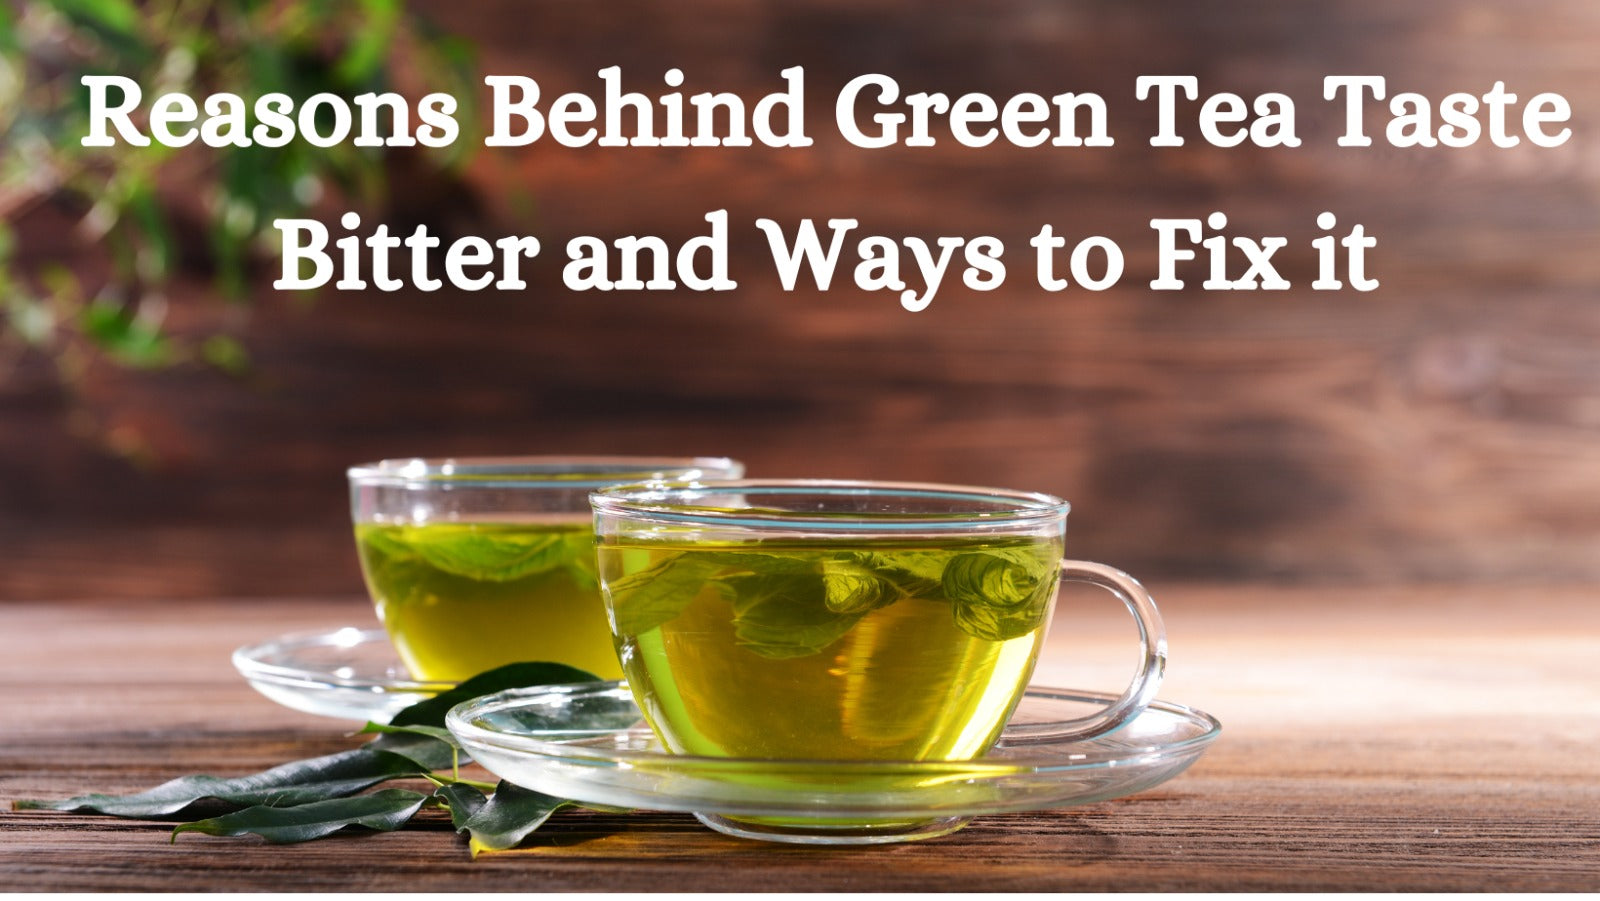 Reasons Behind Green Tea Taste Bitter and Ways to Fix it